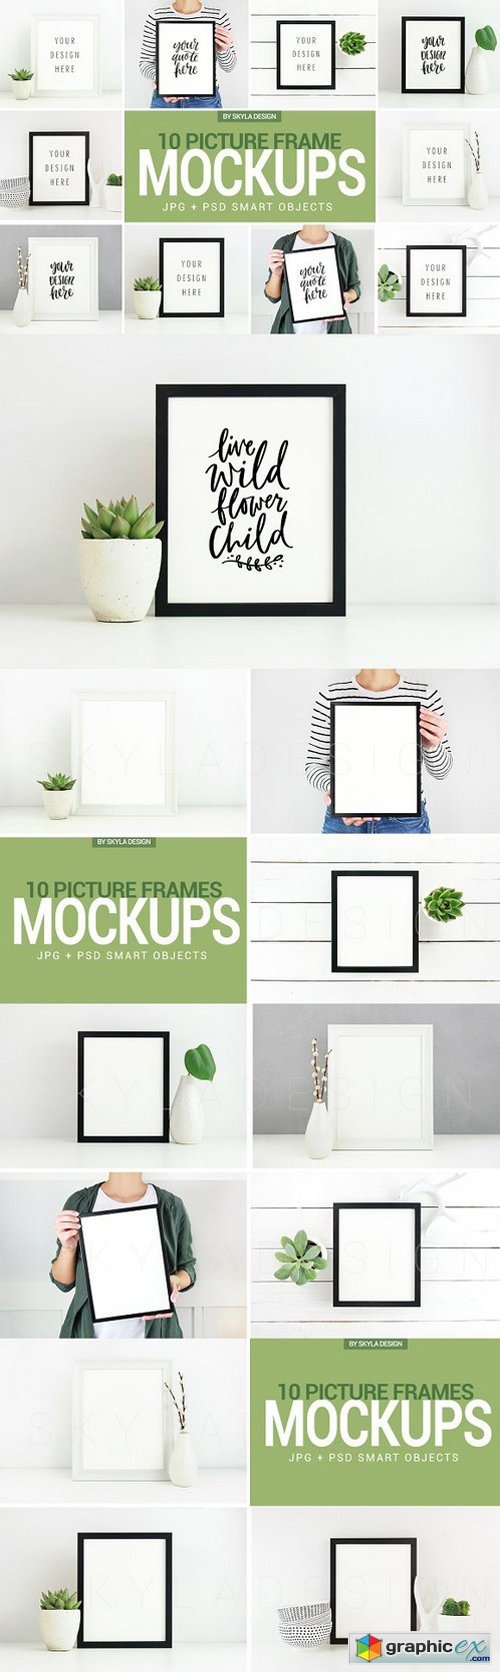 Poster & Picture frame mockup photos